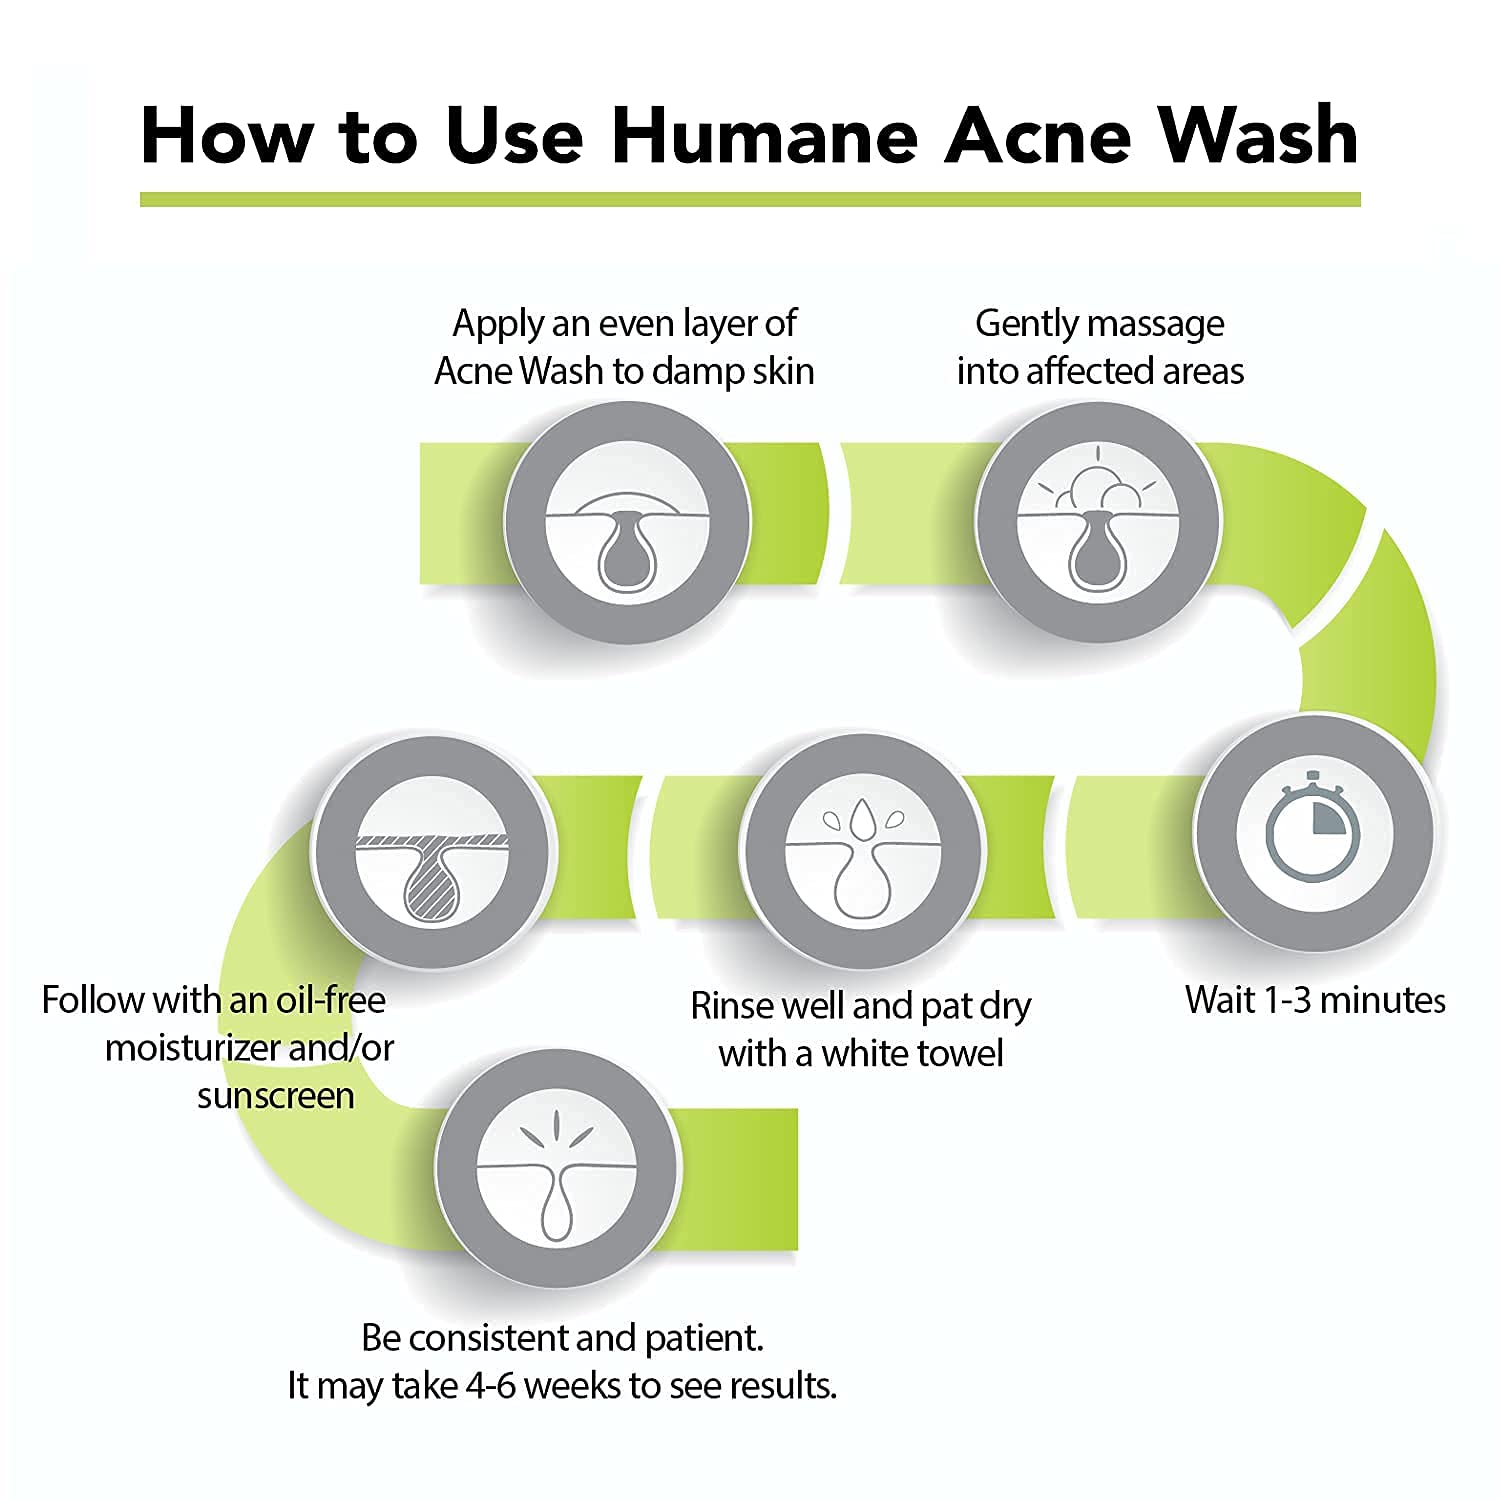 humane Maximum-Strength Acne Wash - 10% Benzoyl Peroxide Acne Treatment for Face, Skin, Butt, Back and Body - 8 Fl Oz - Dermatologist-Tested Non-Foaming Cleanser - Vegan, Cruelty-Free